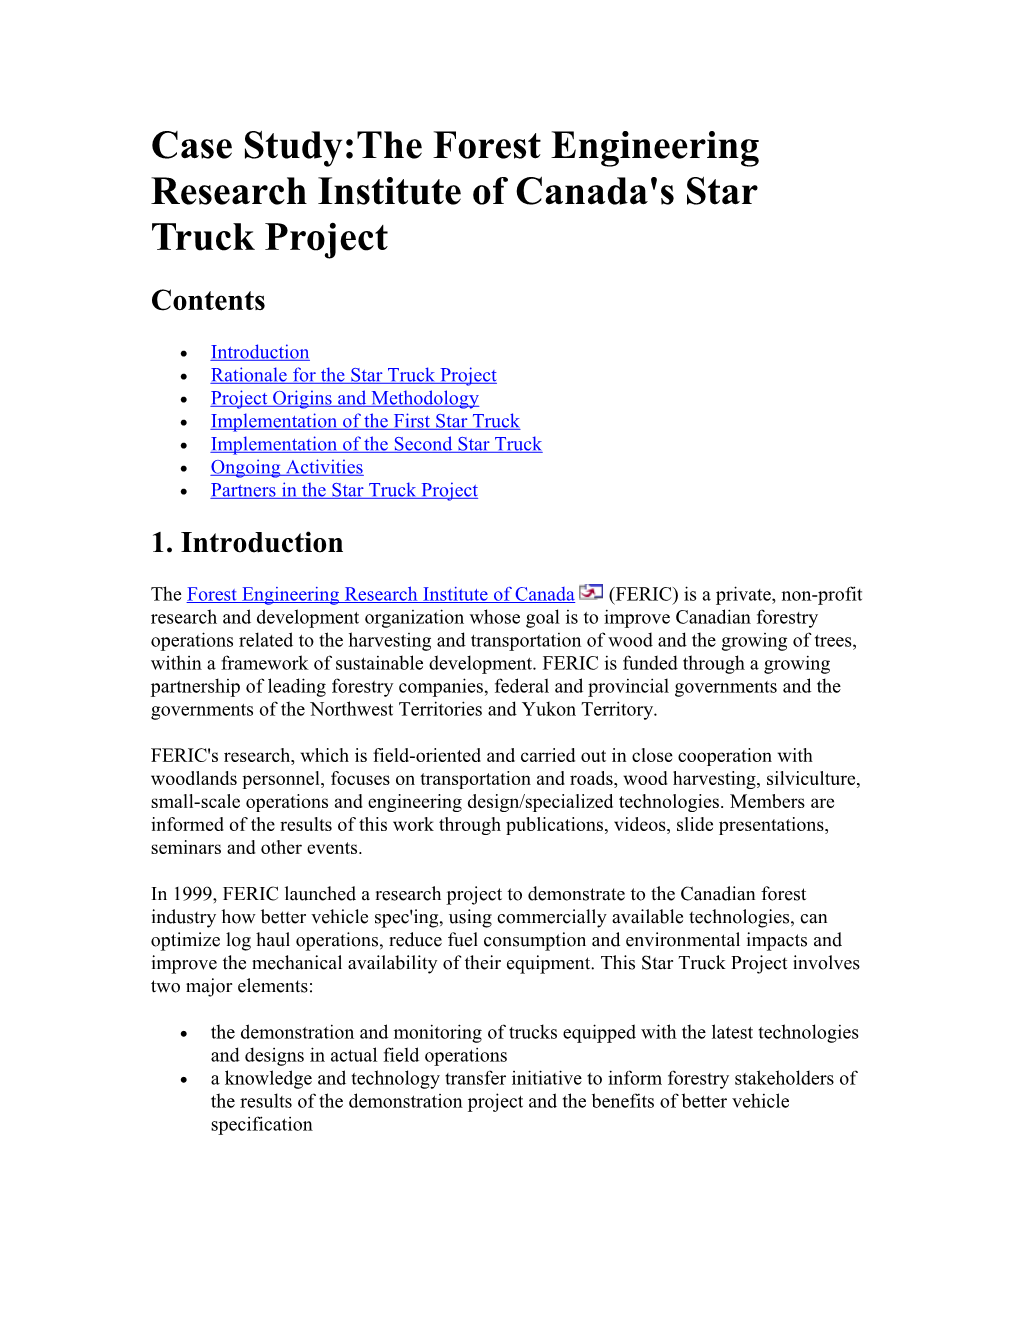 Case Study:The Forest Engineering Research Institute of Canada's Star Truck Project